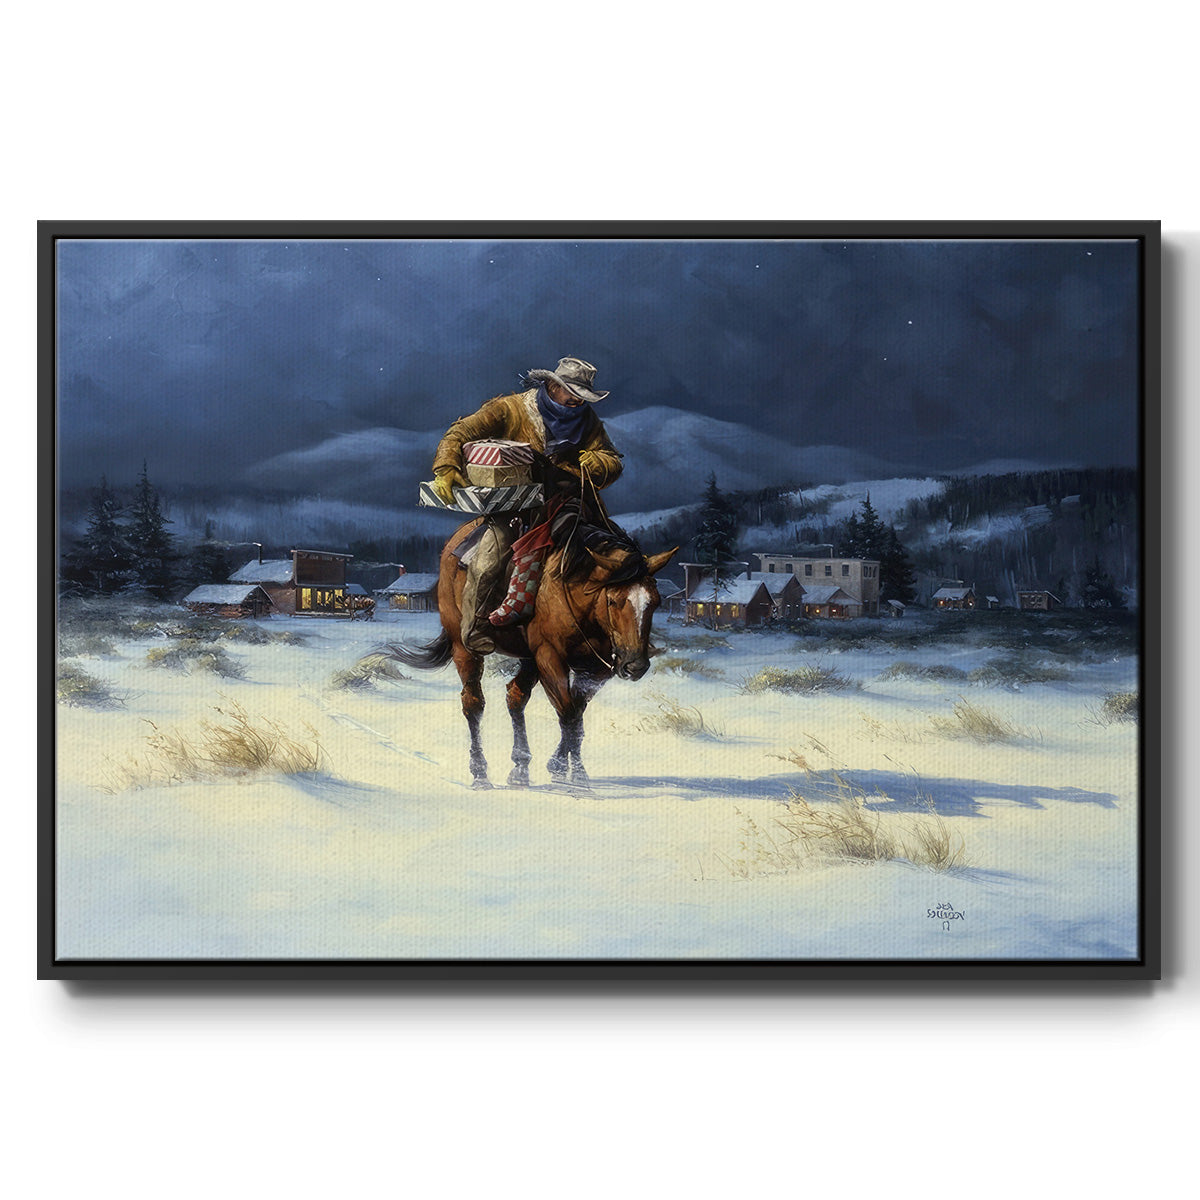 Bringing Christmas Home - Framed Gallery Wrapped Canvas in Floating Frame